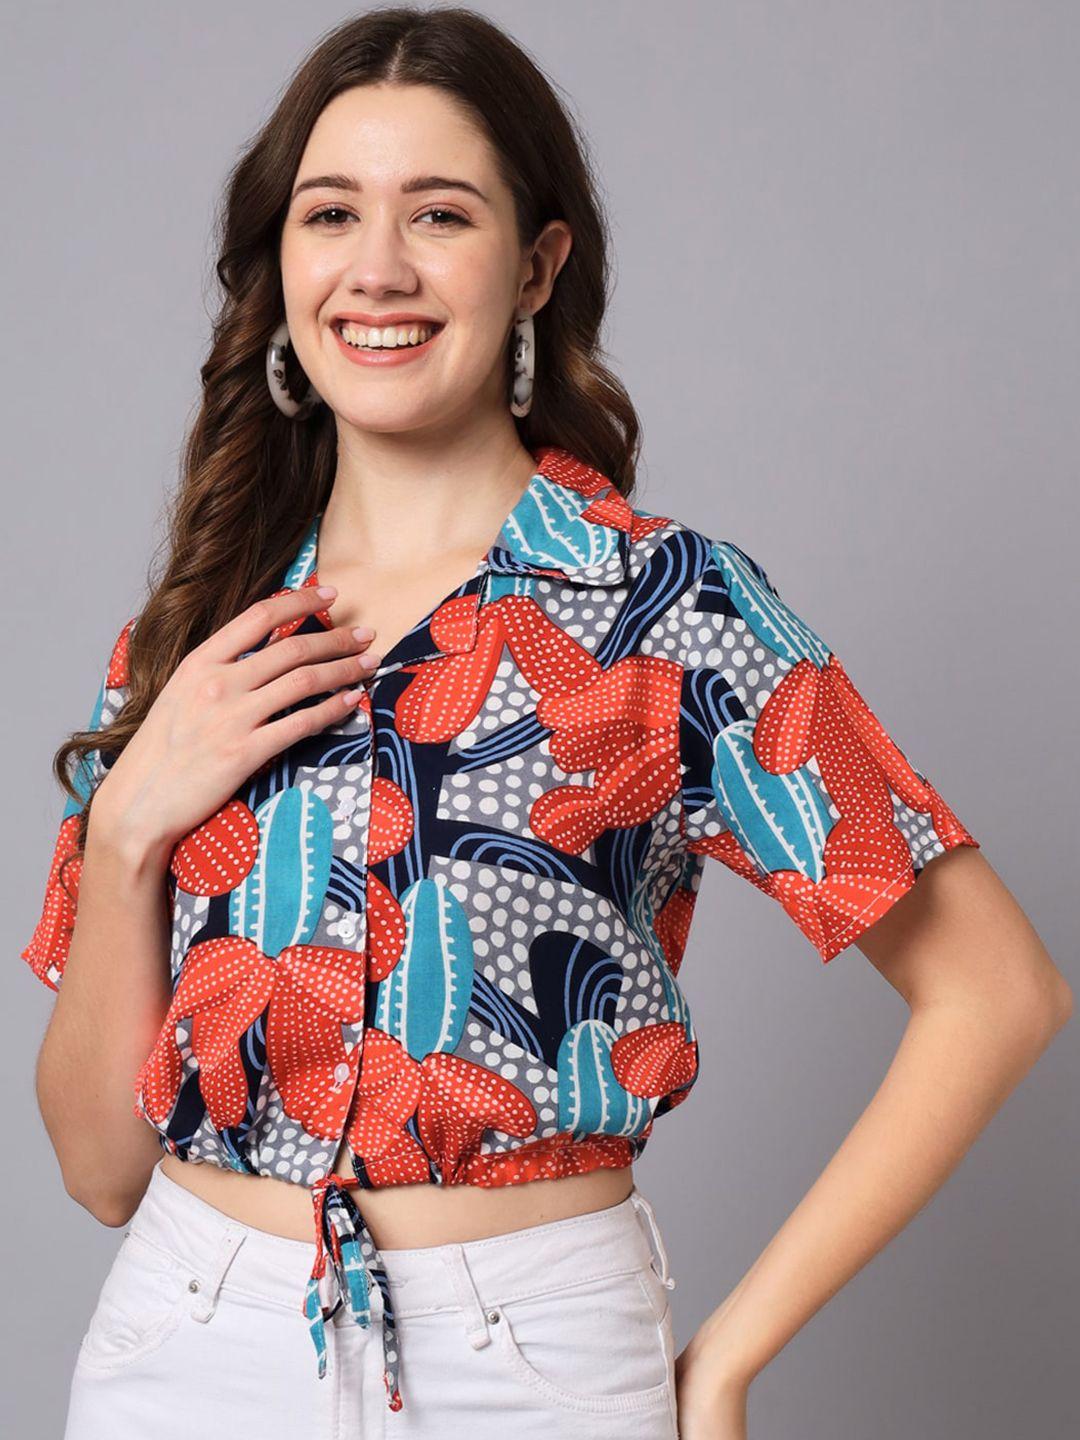 the dry state floral printed shirt style crop top